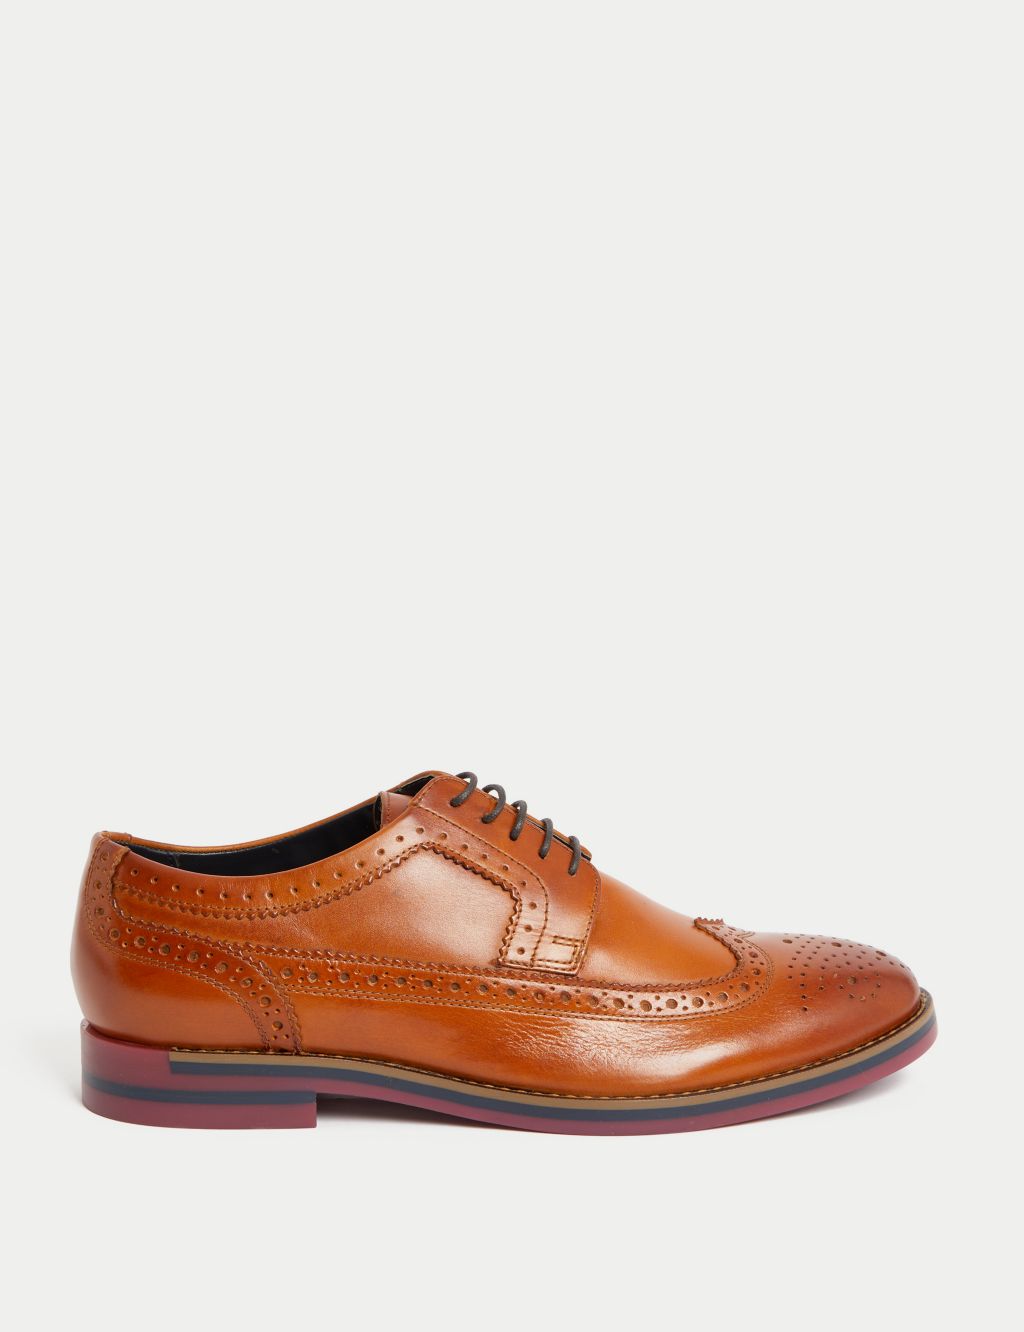 Leather Trisole Brogues image 1